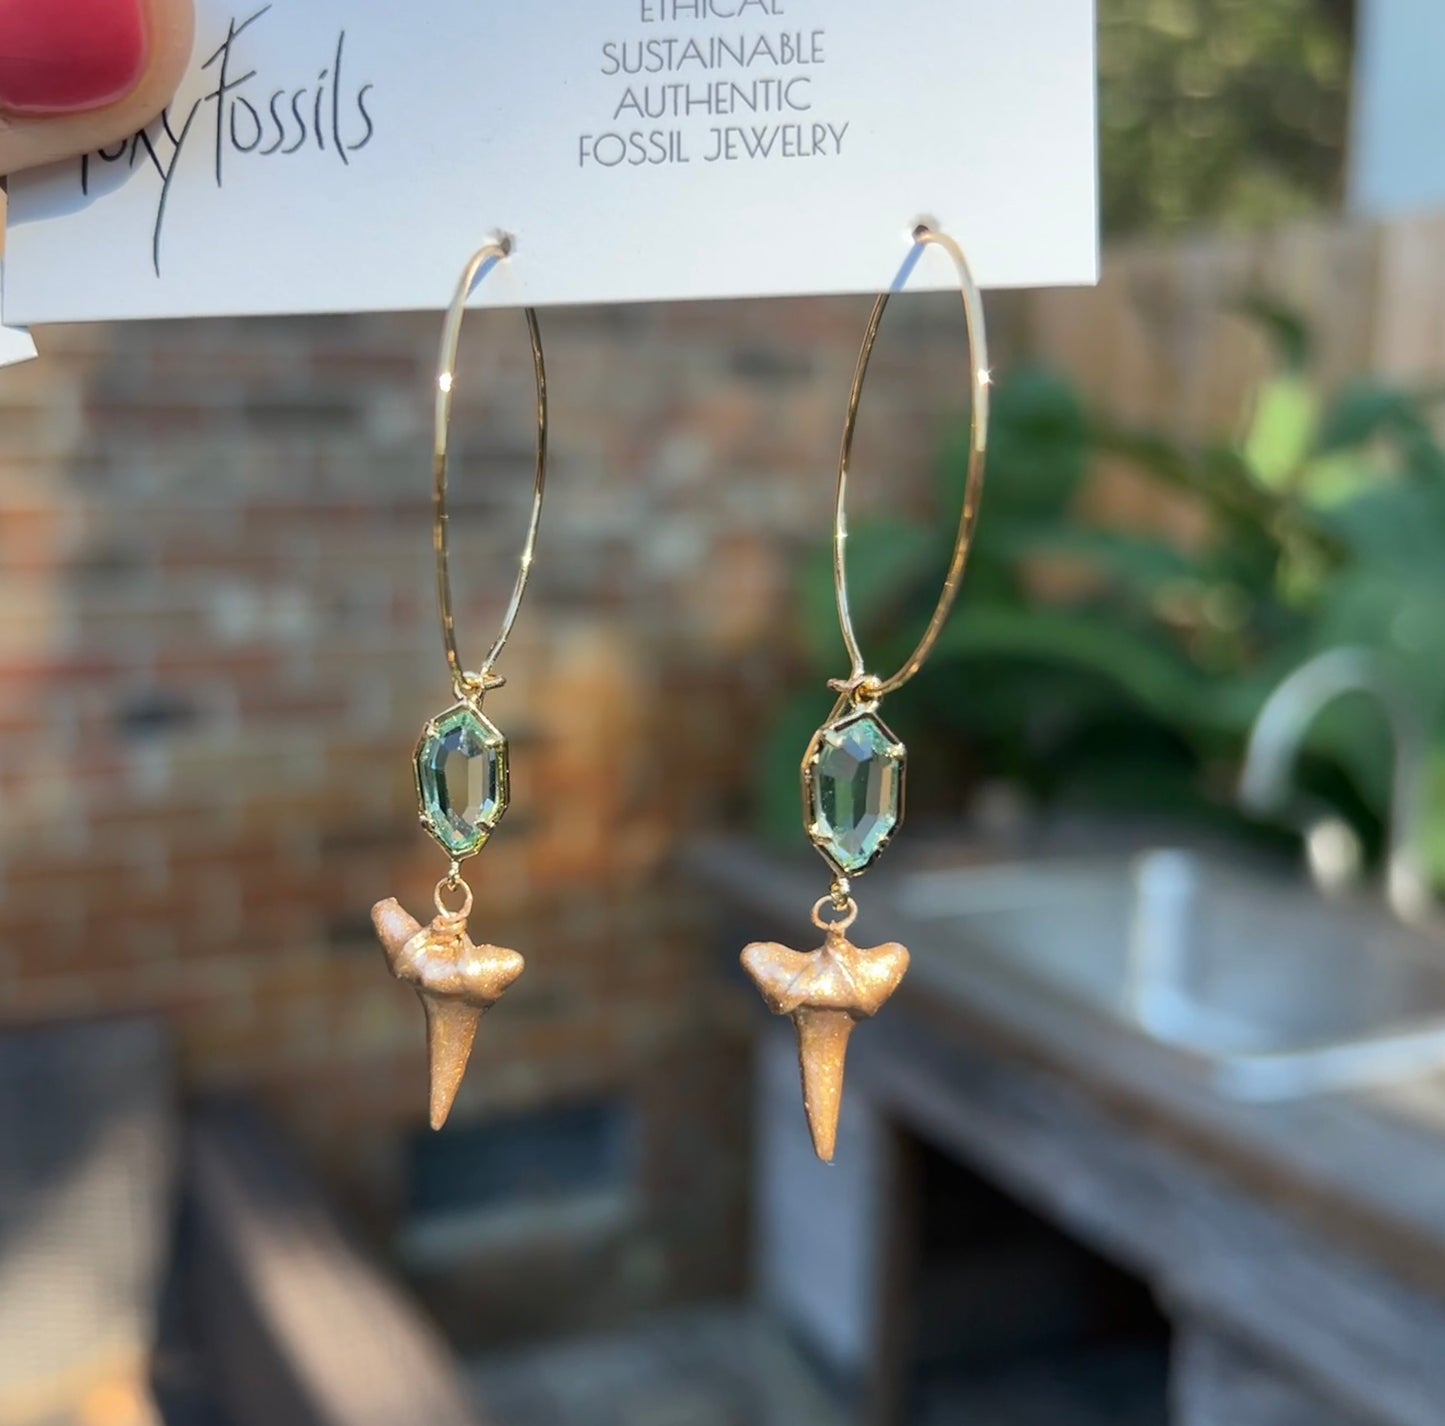 Saltwater legacy, gold, shark tooth earrings, Foxy Fossils ￼